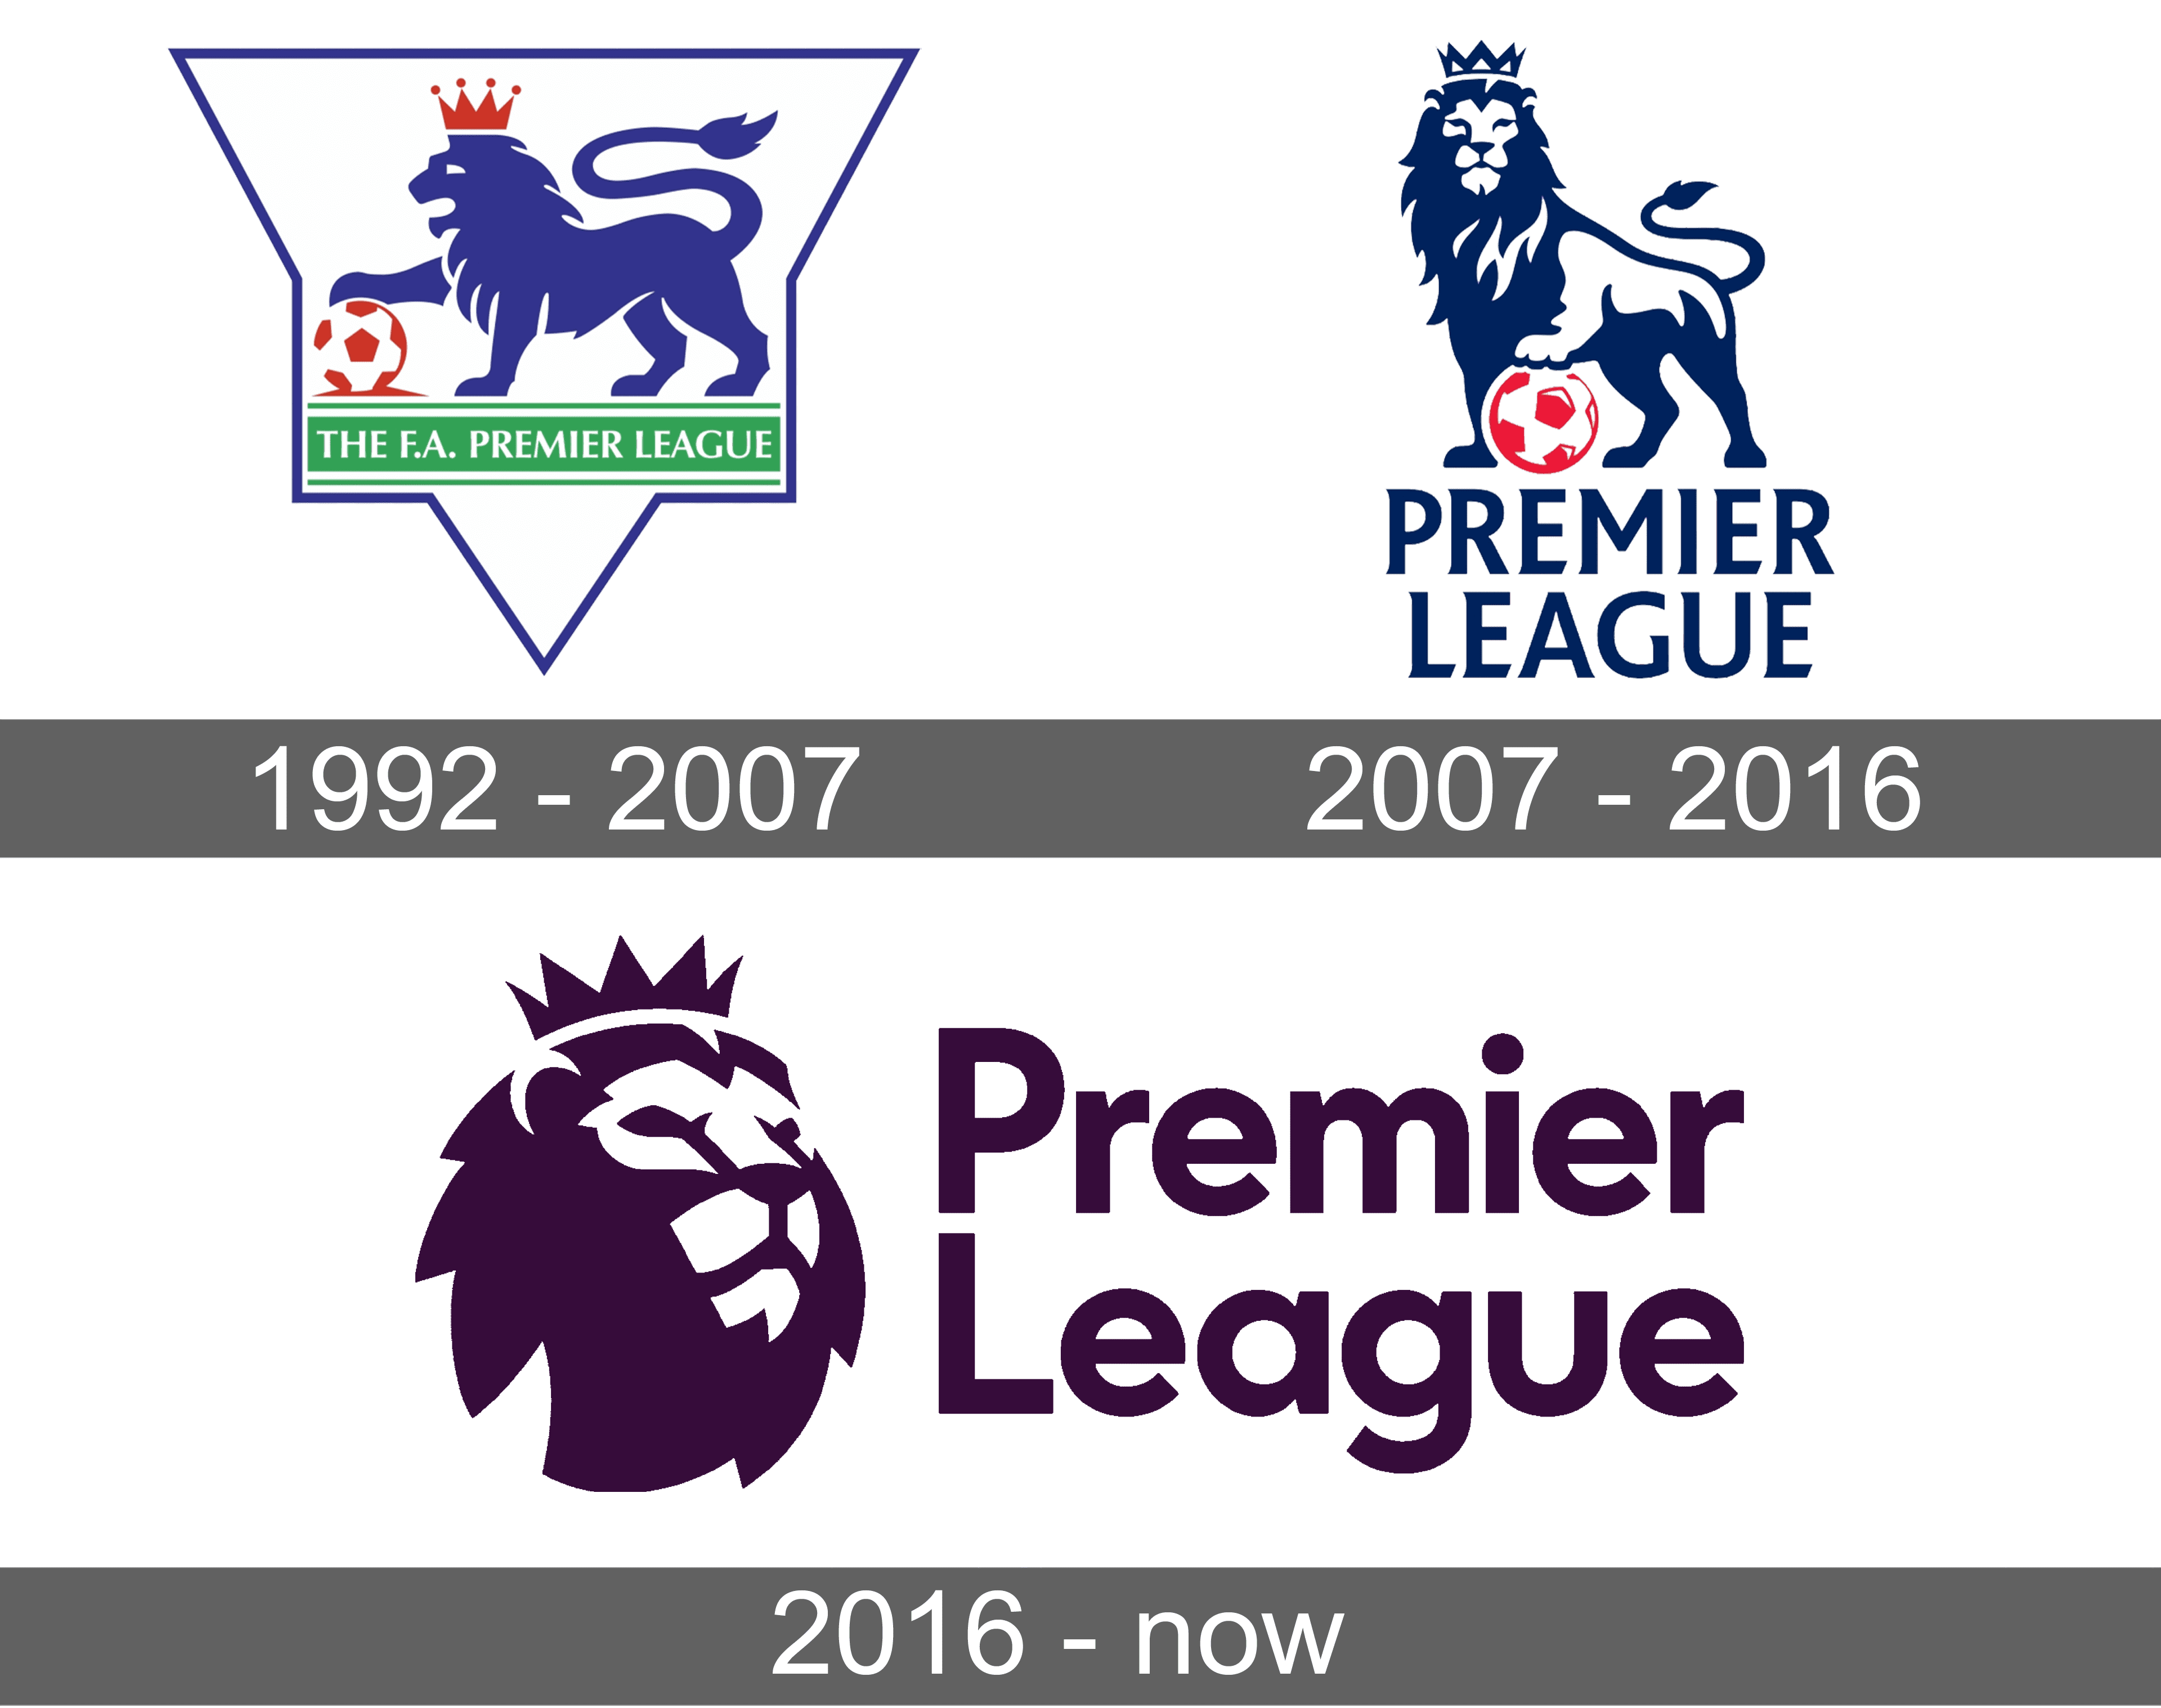 Premier League Logo and symbol, meaning, history, sign.